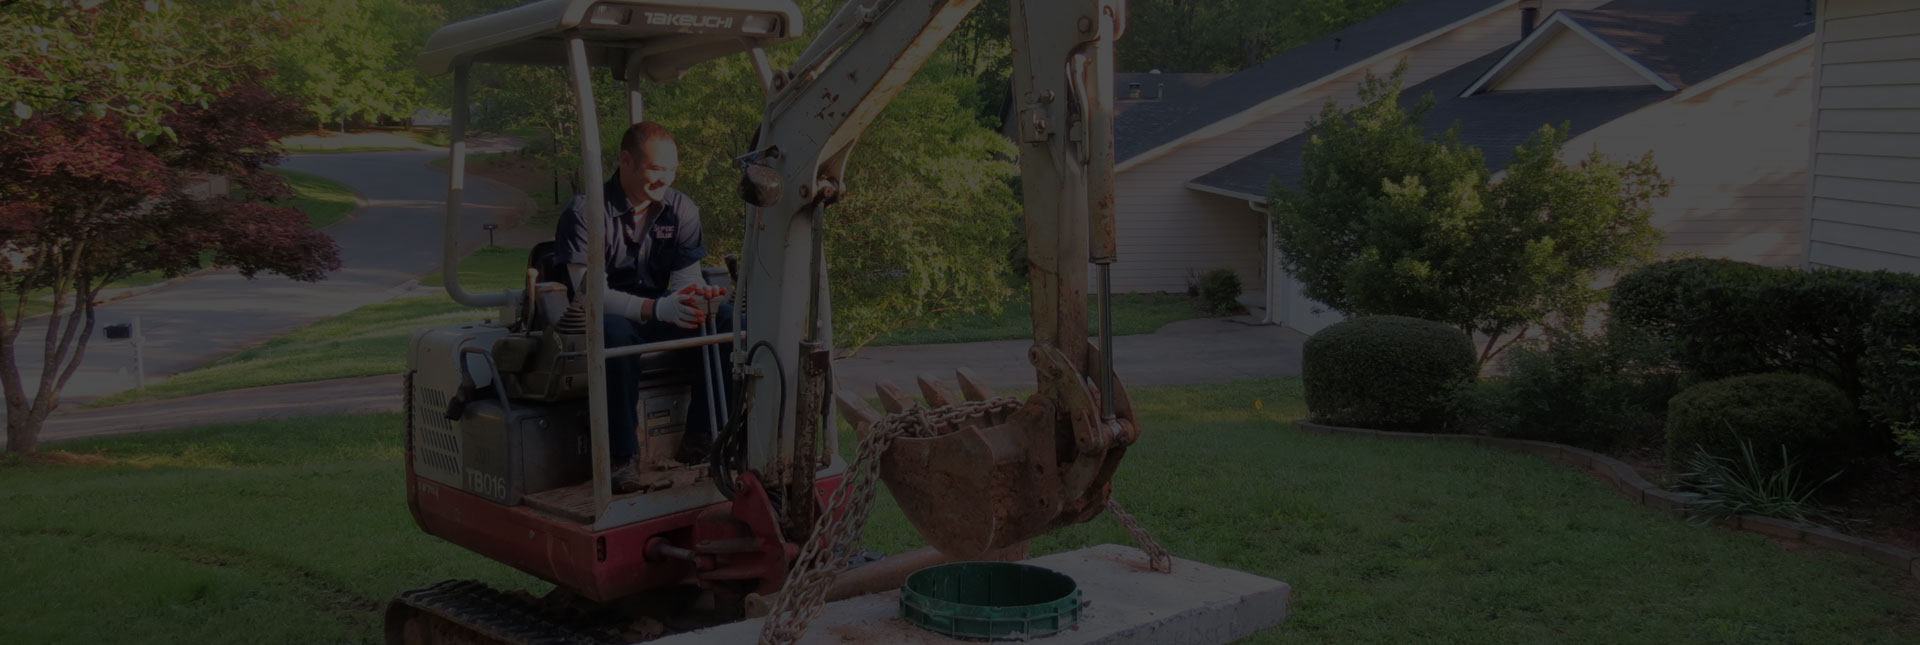 septic system installations perth